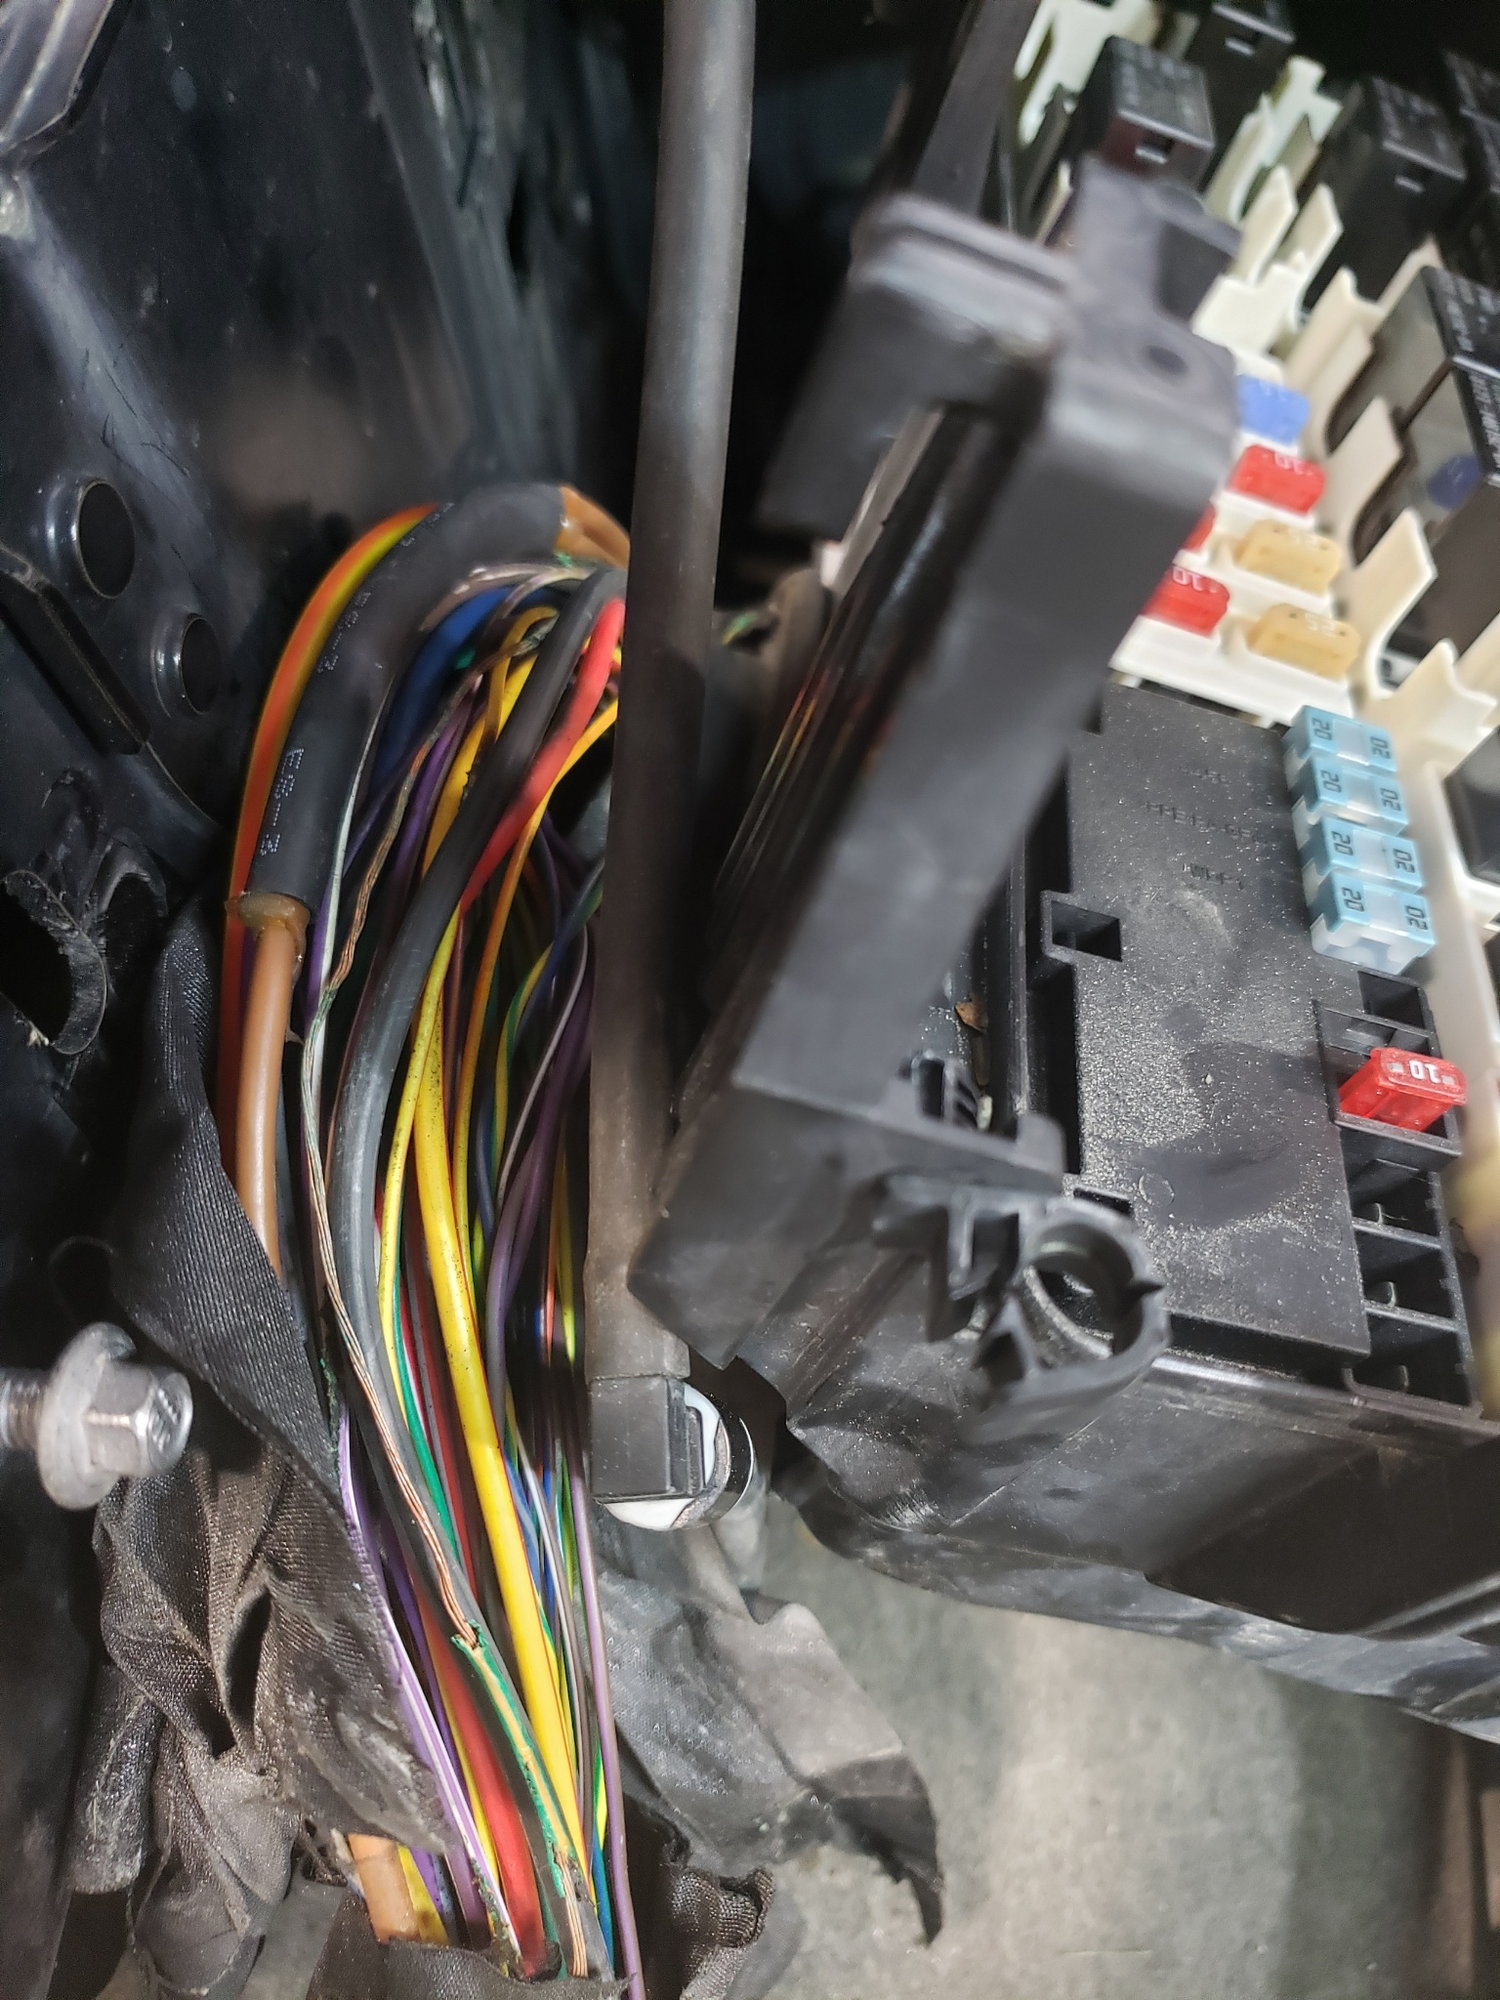 2019 lariat intermittent burning smell in cab - Ford F150 Forum 2013 F150 Burning Smell In Cab